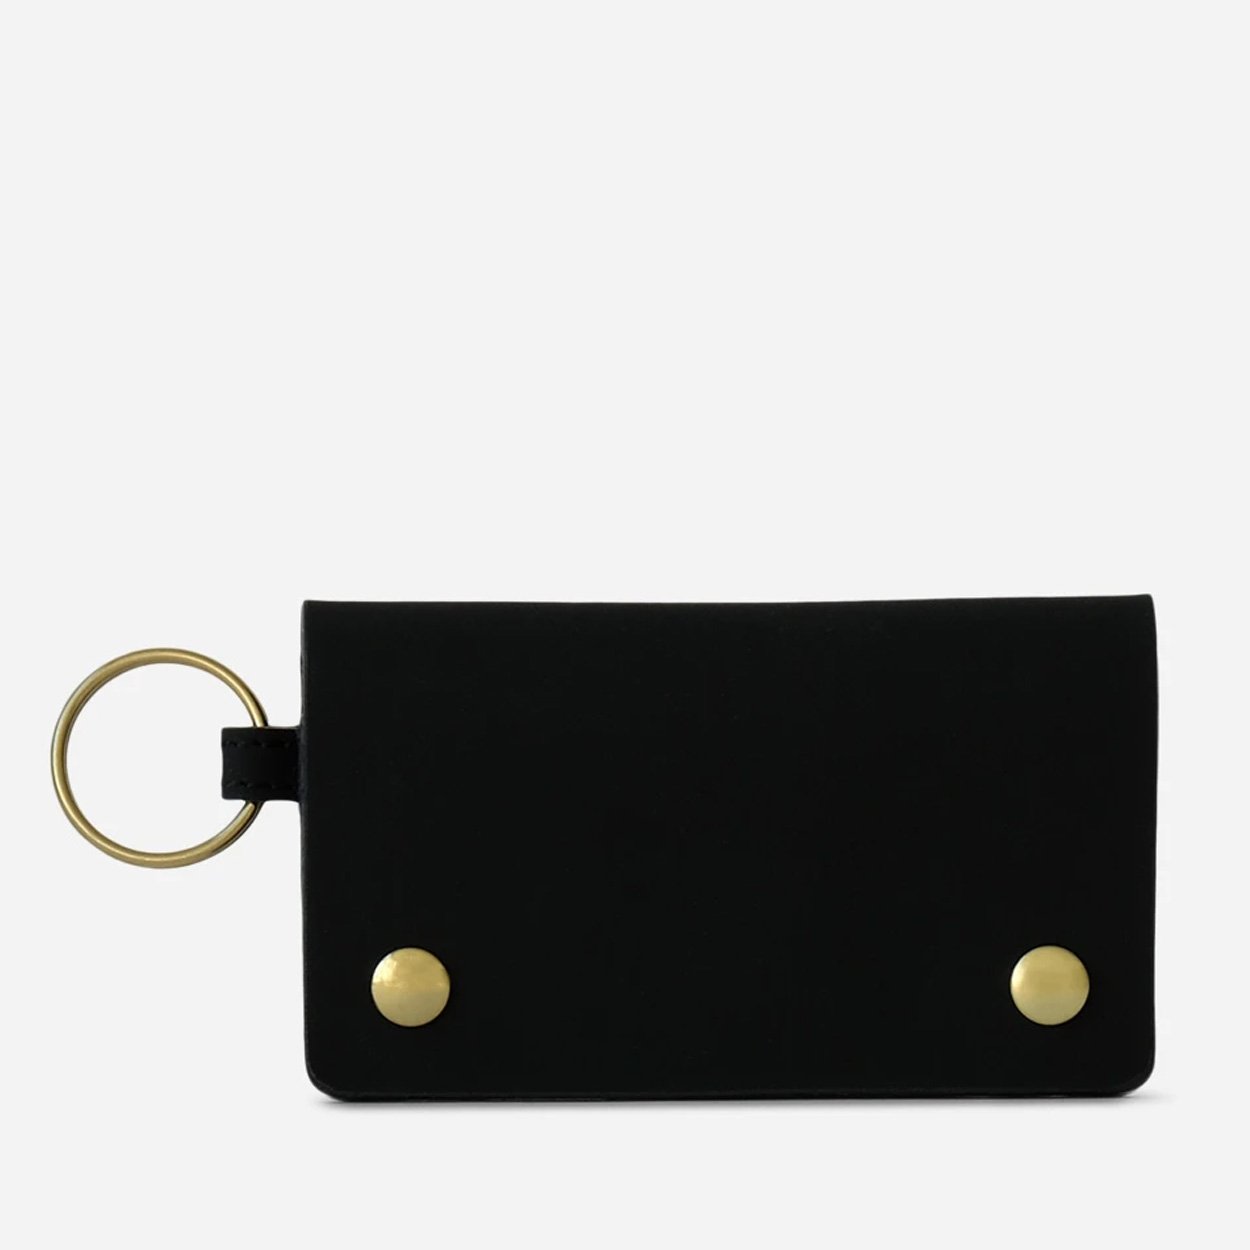 The Snaps Wallet - Black